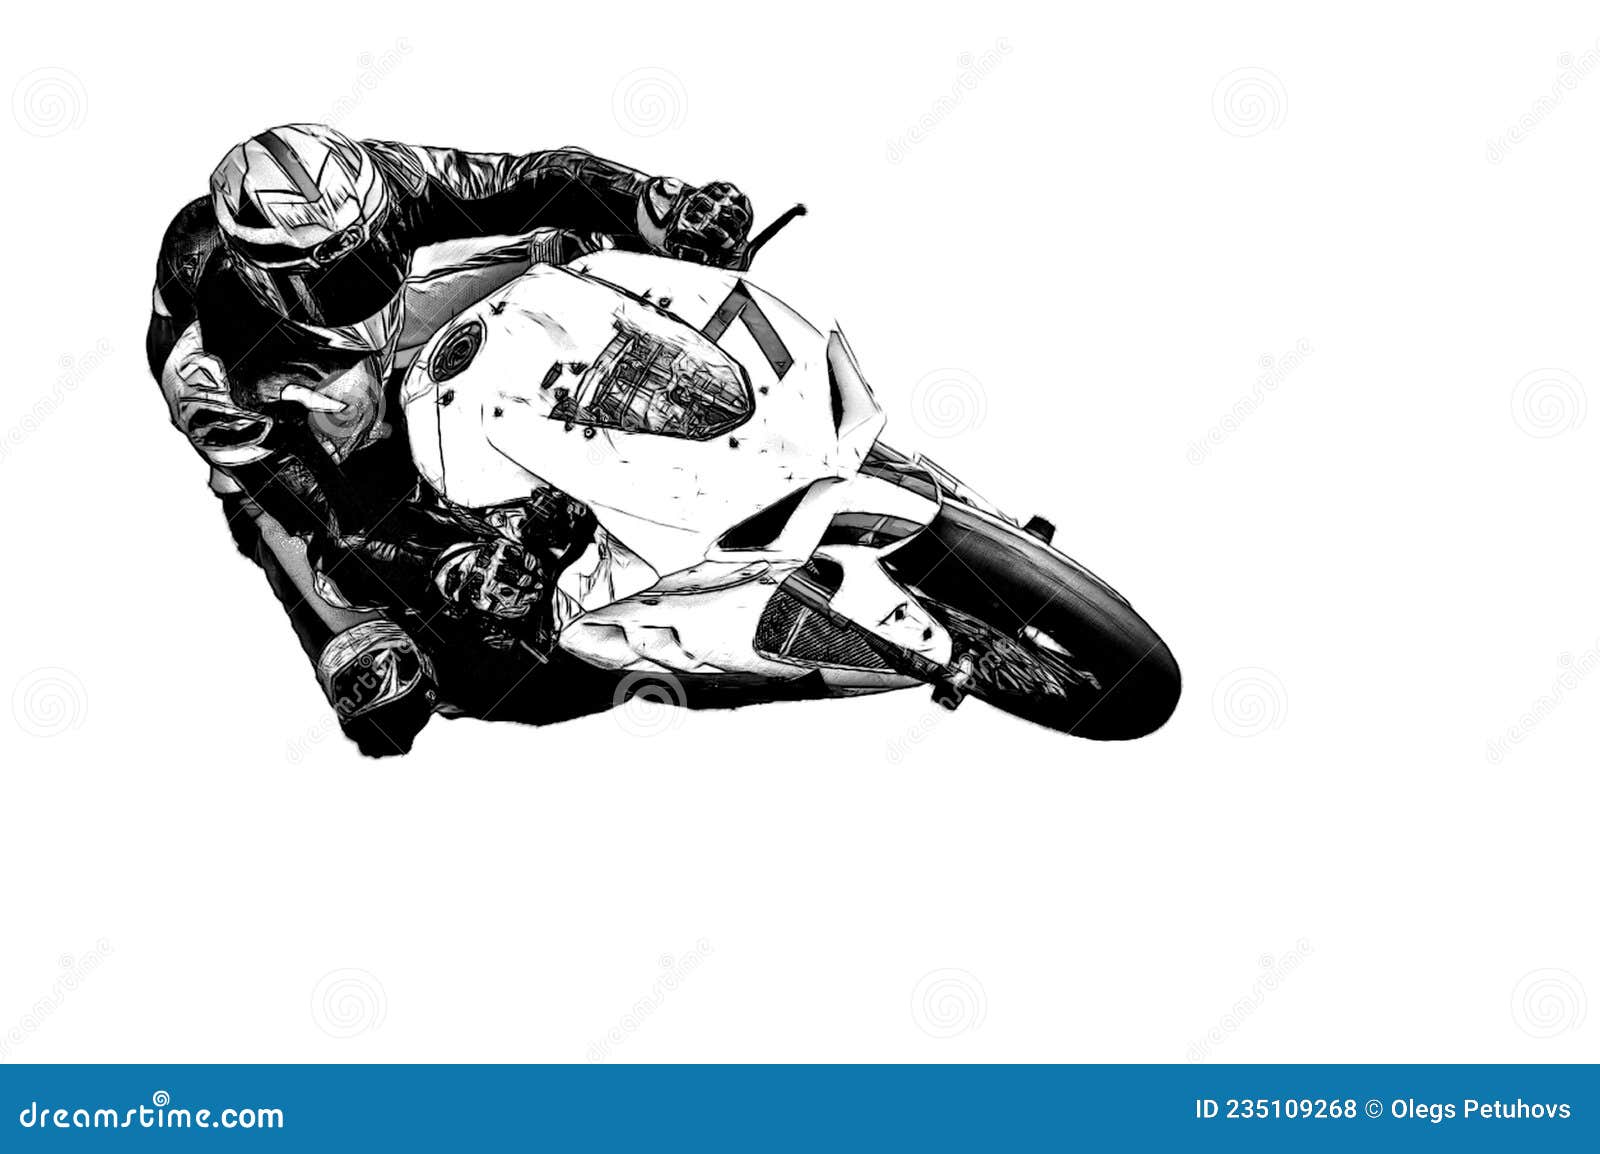 racer on a sports motobike, white  background. pencil image